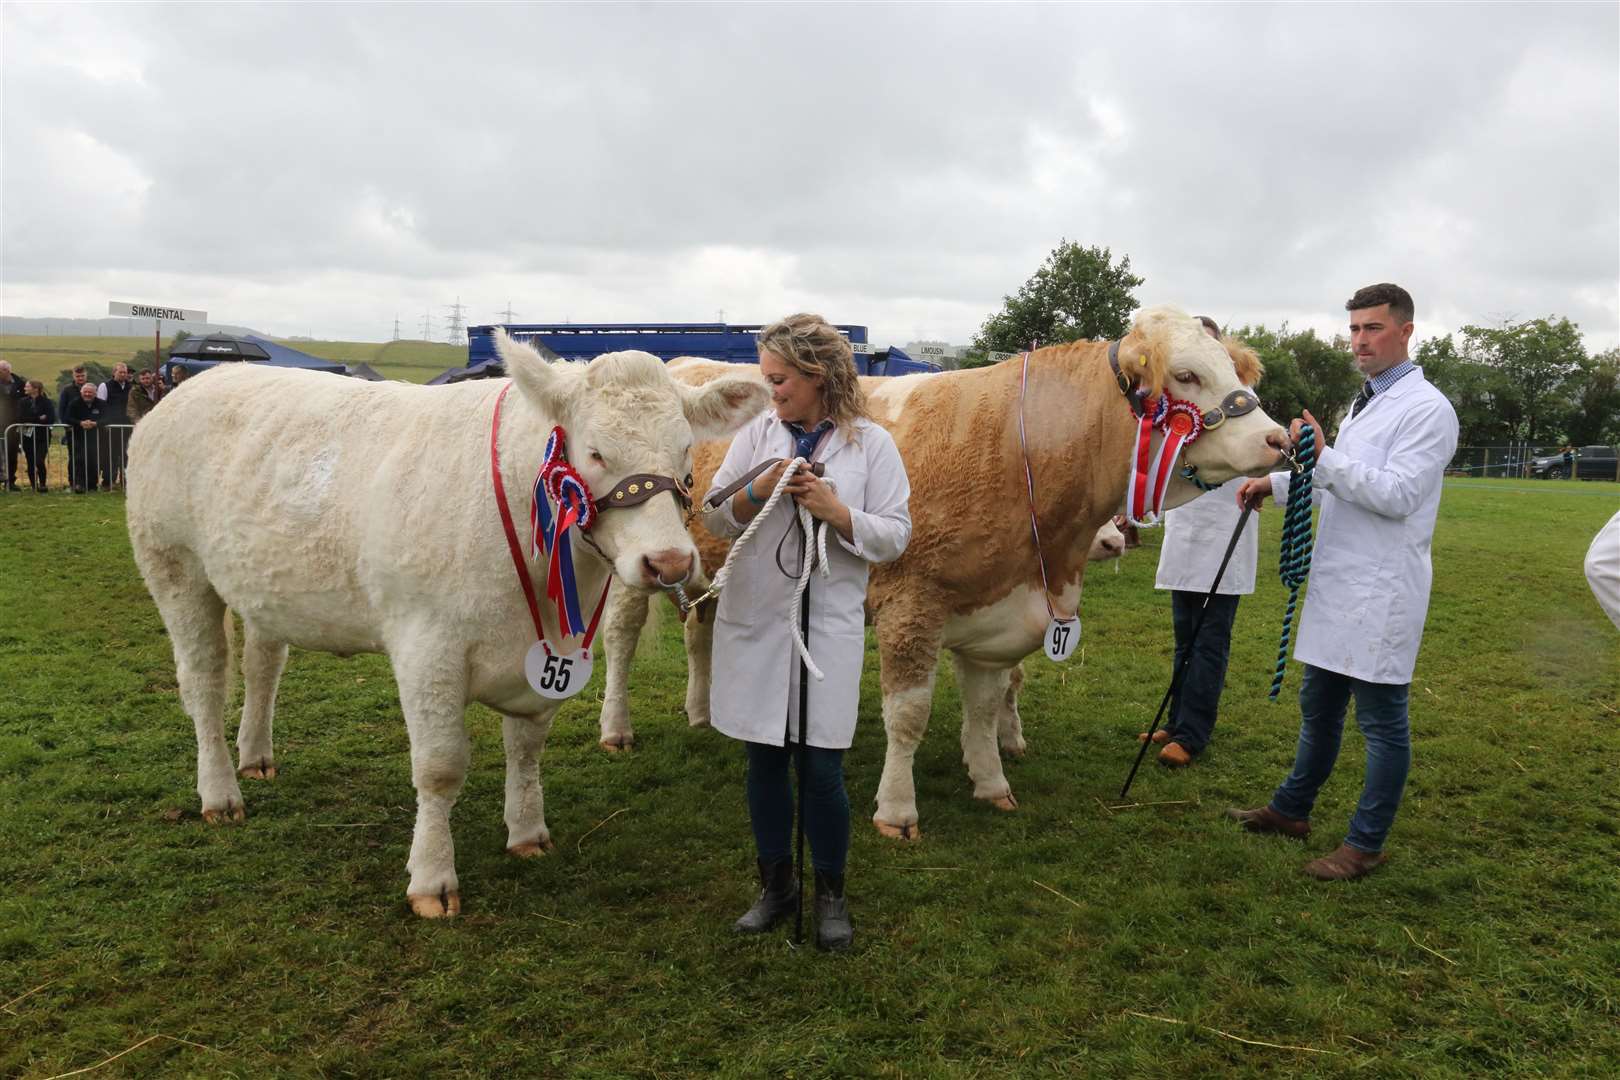 The interbreed champion (55) aand the reserve champion (97) Picture: David Porter